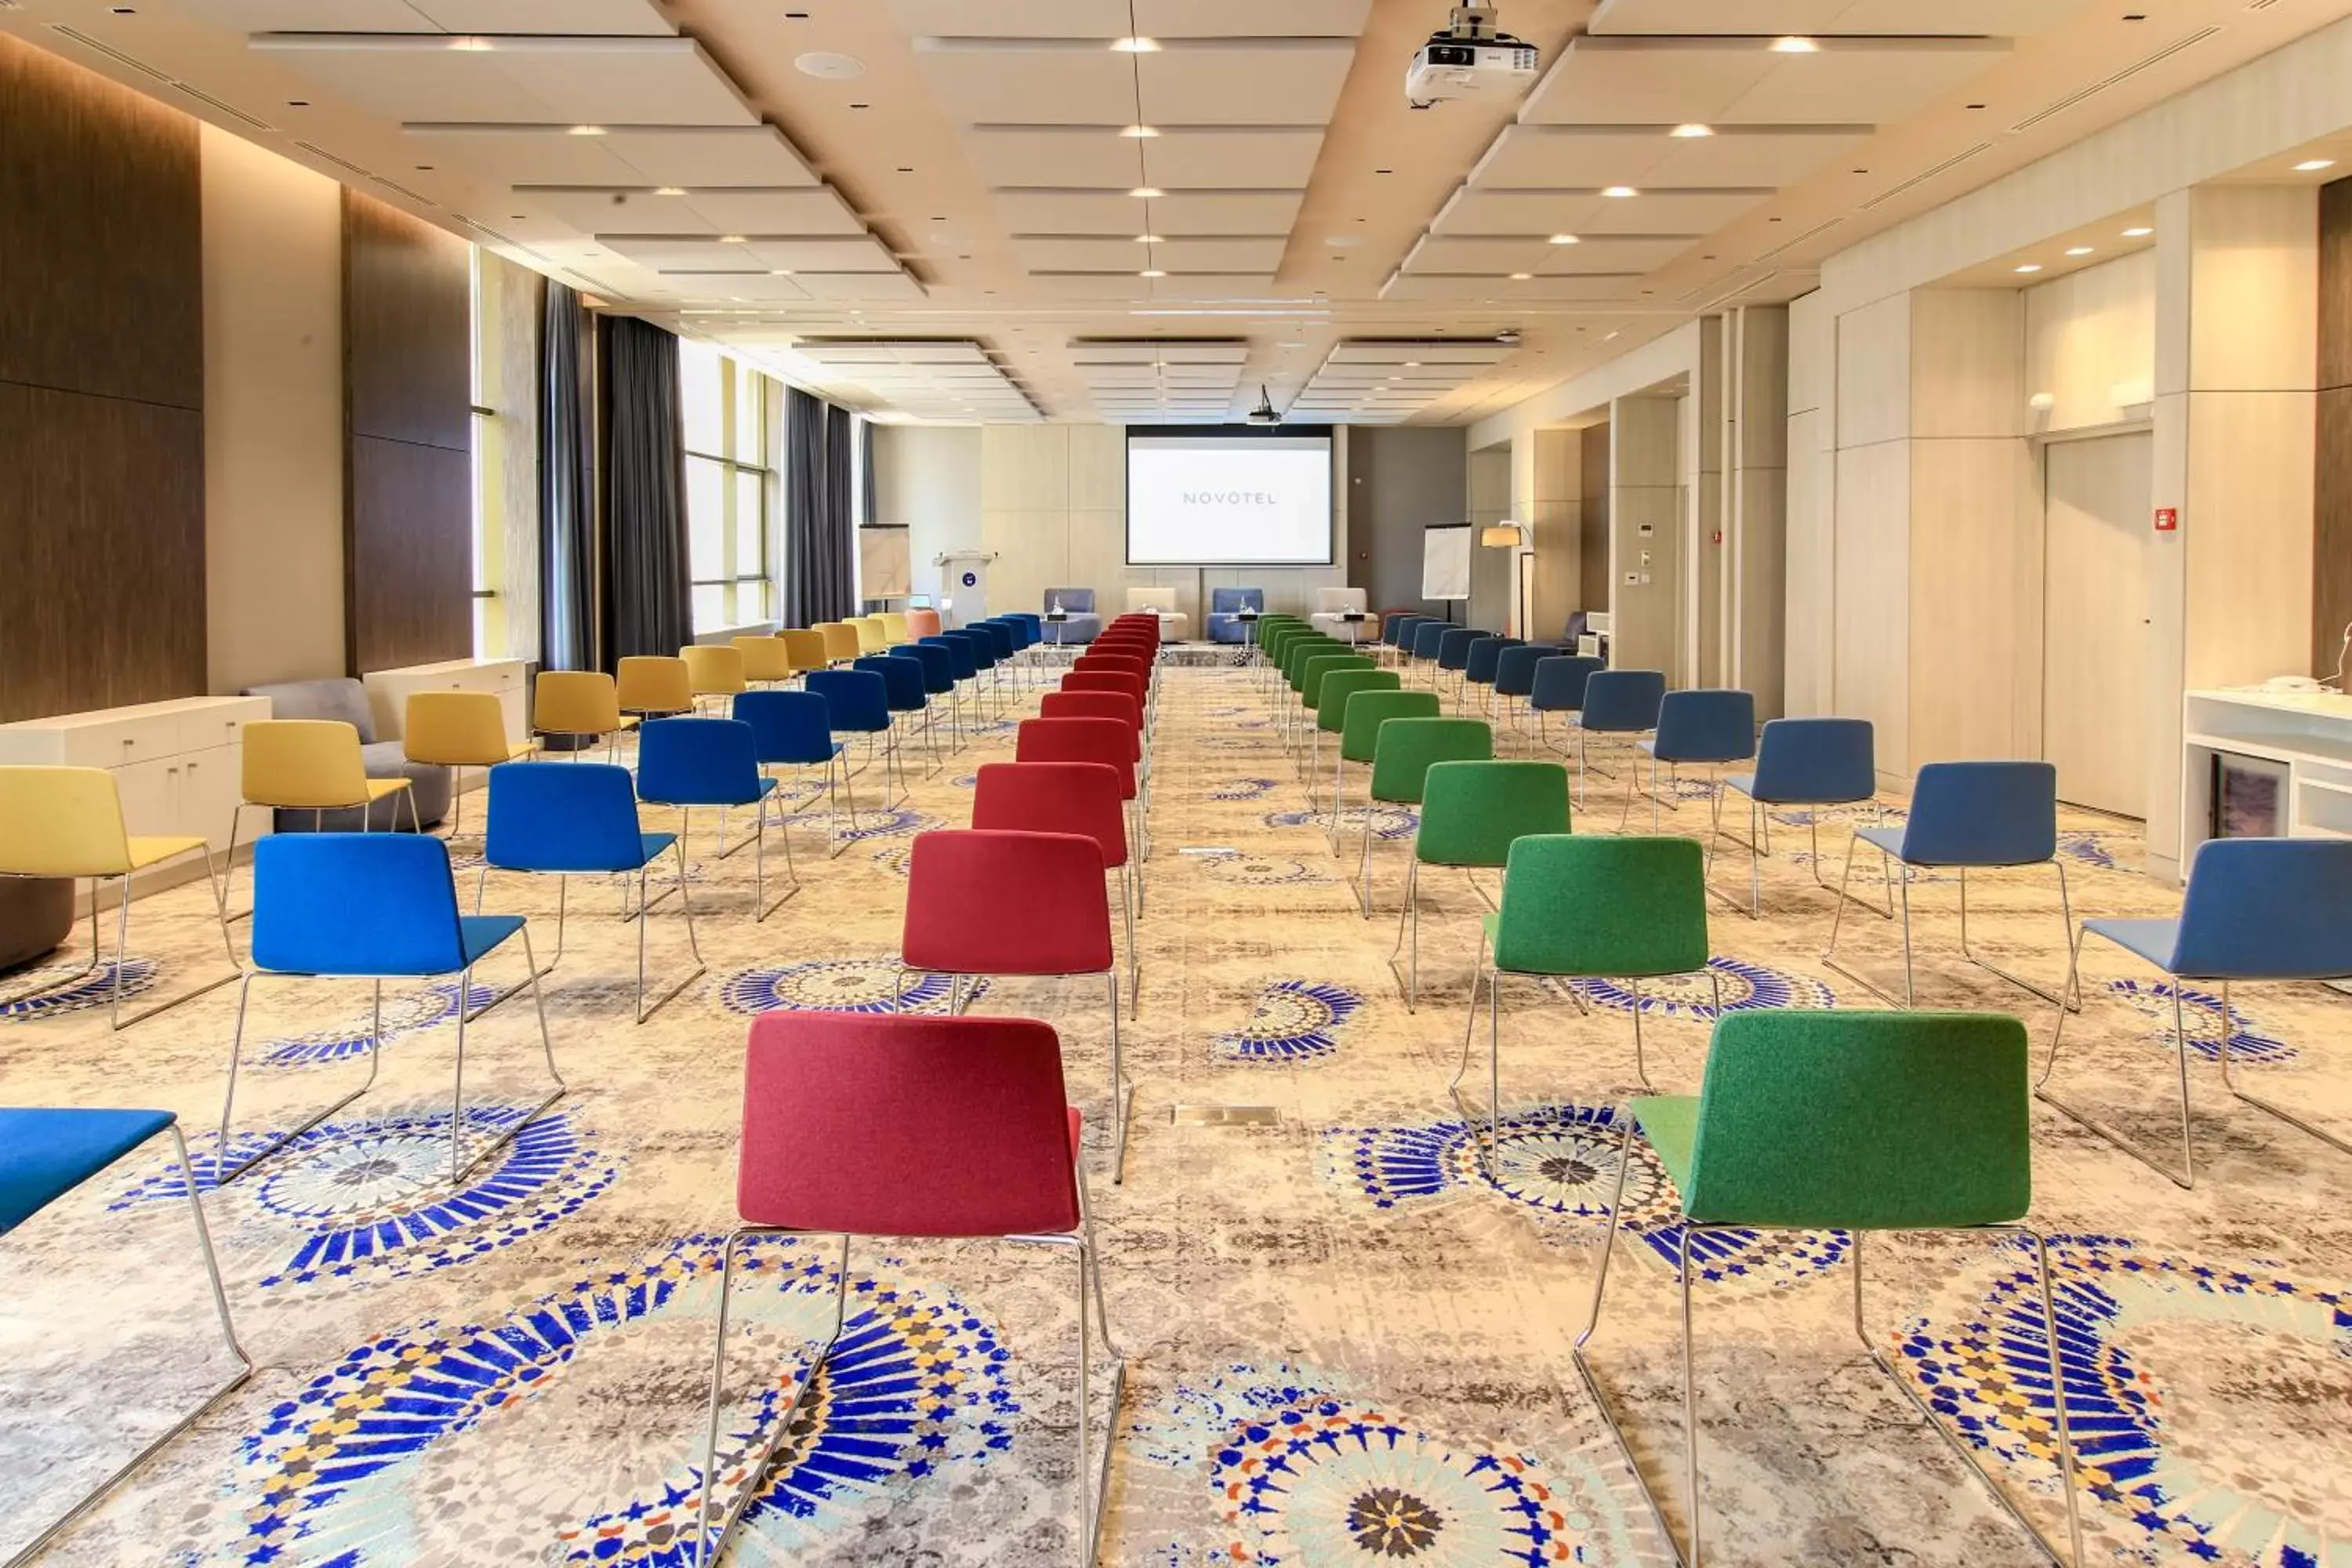 Business facilities in Novotel Tunis Lac